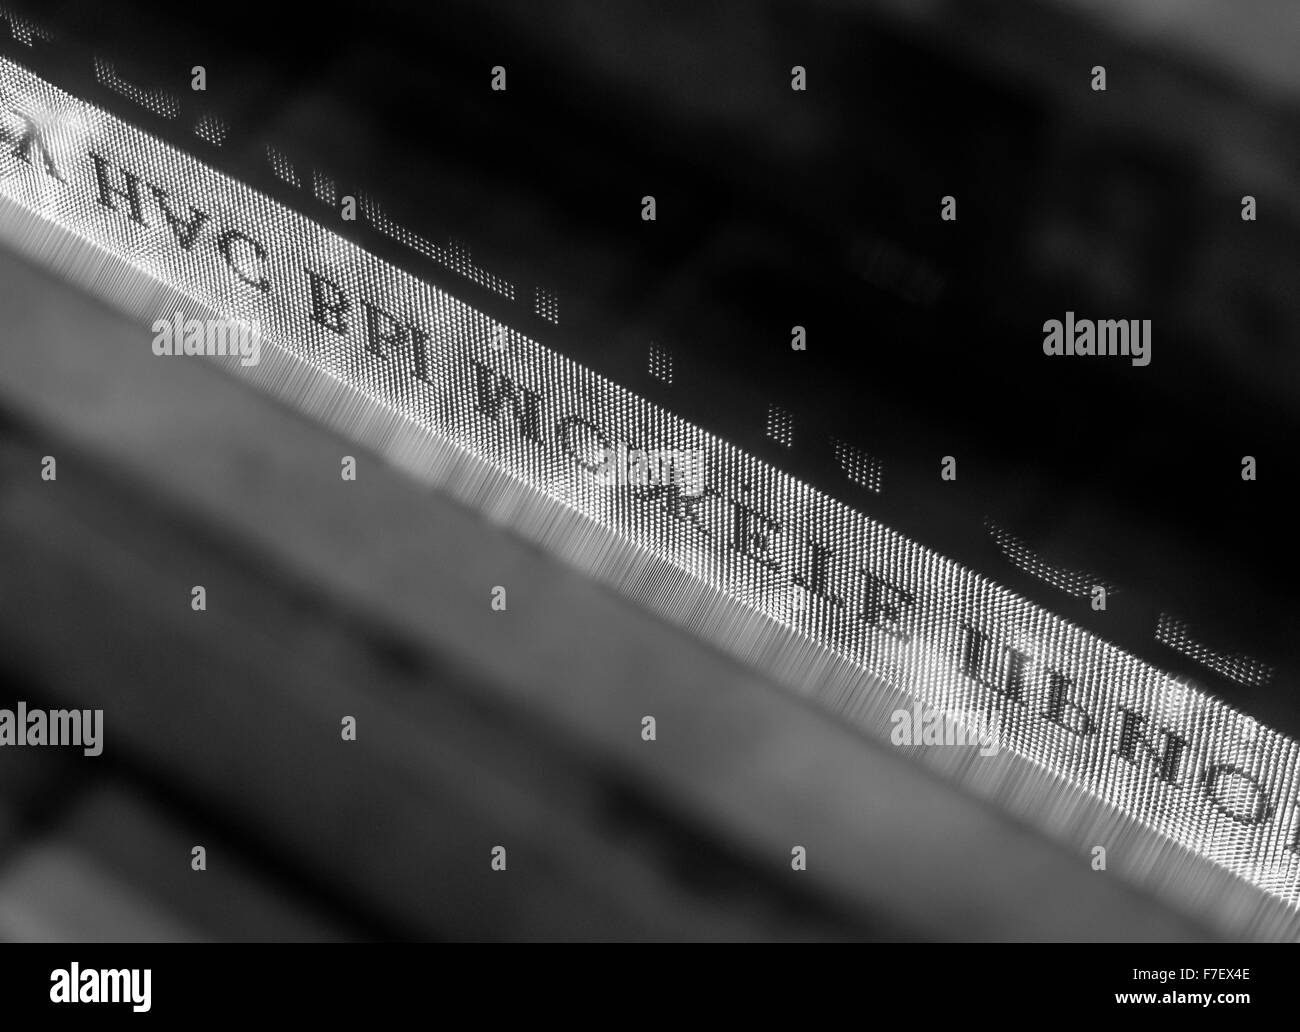 Monochrome photograph of LED advertising in Russian in a pool of a rainwater puddle on a city street. Stock Photo